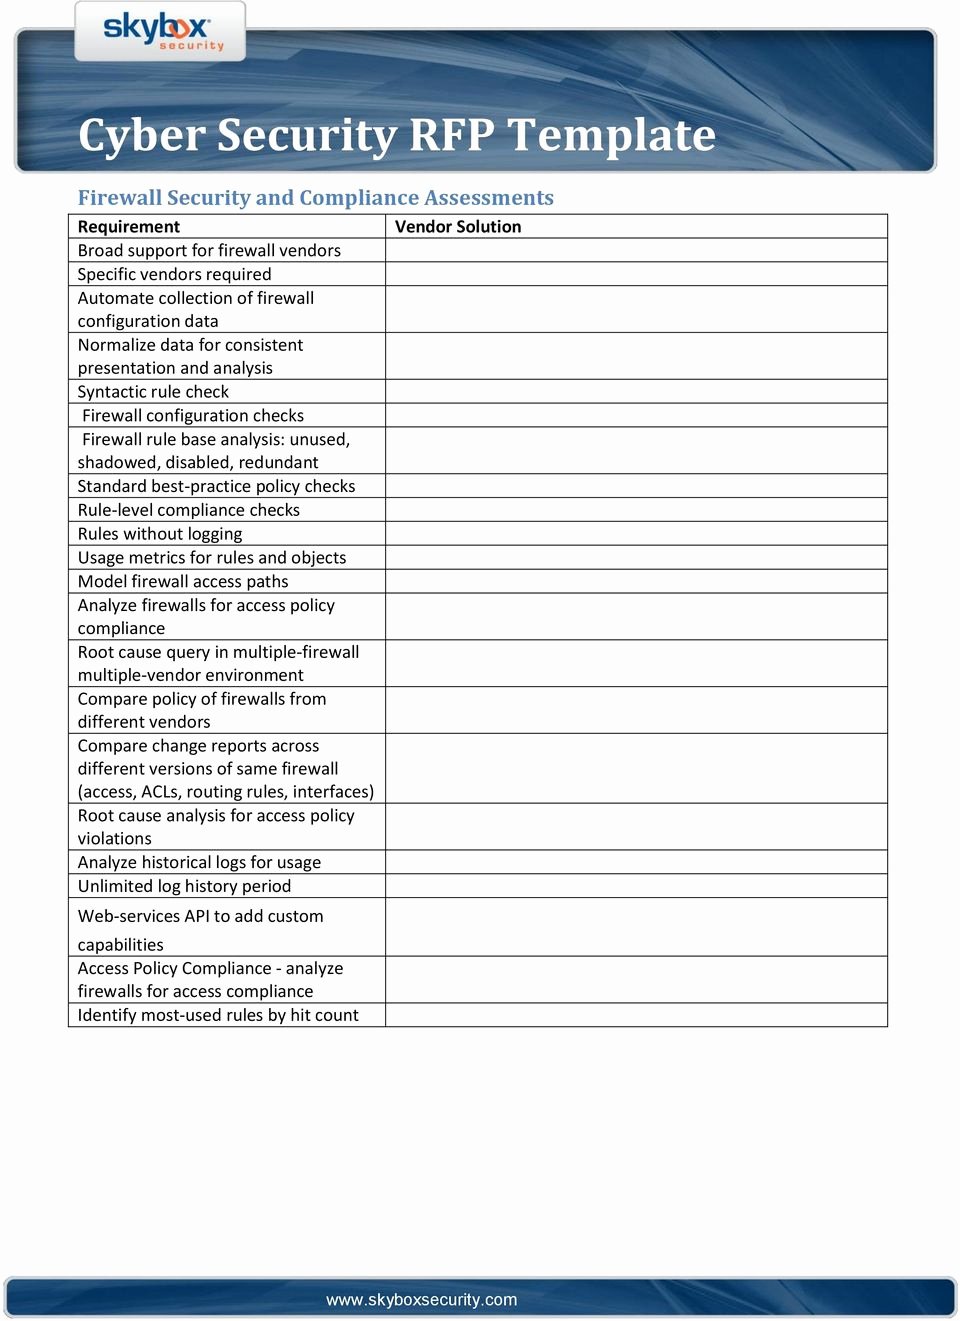 Cyber Security Plan Template Unique Cyber Security Rfp Template Pdf